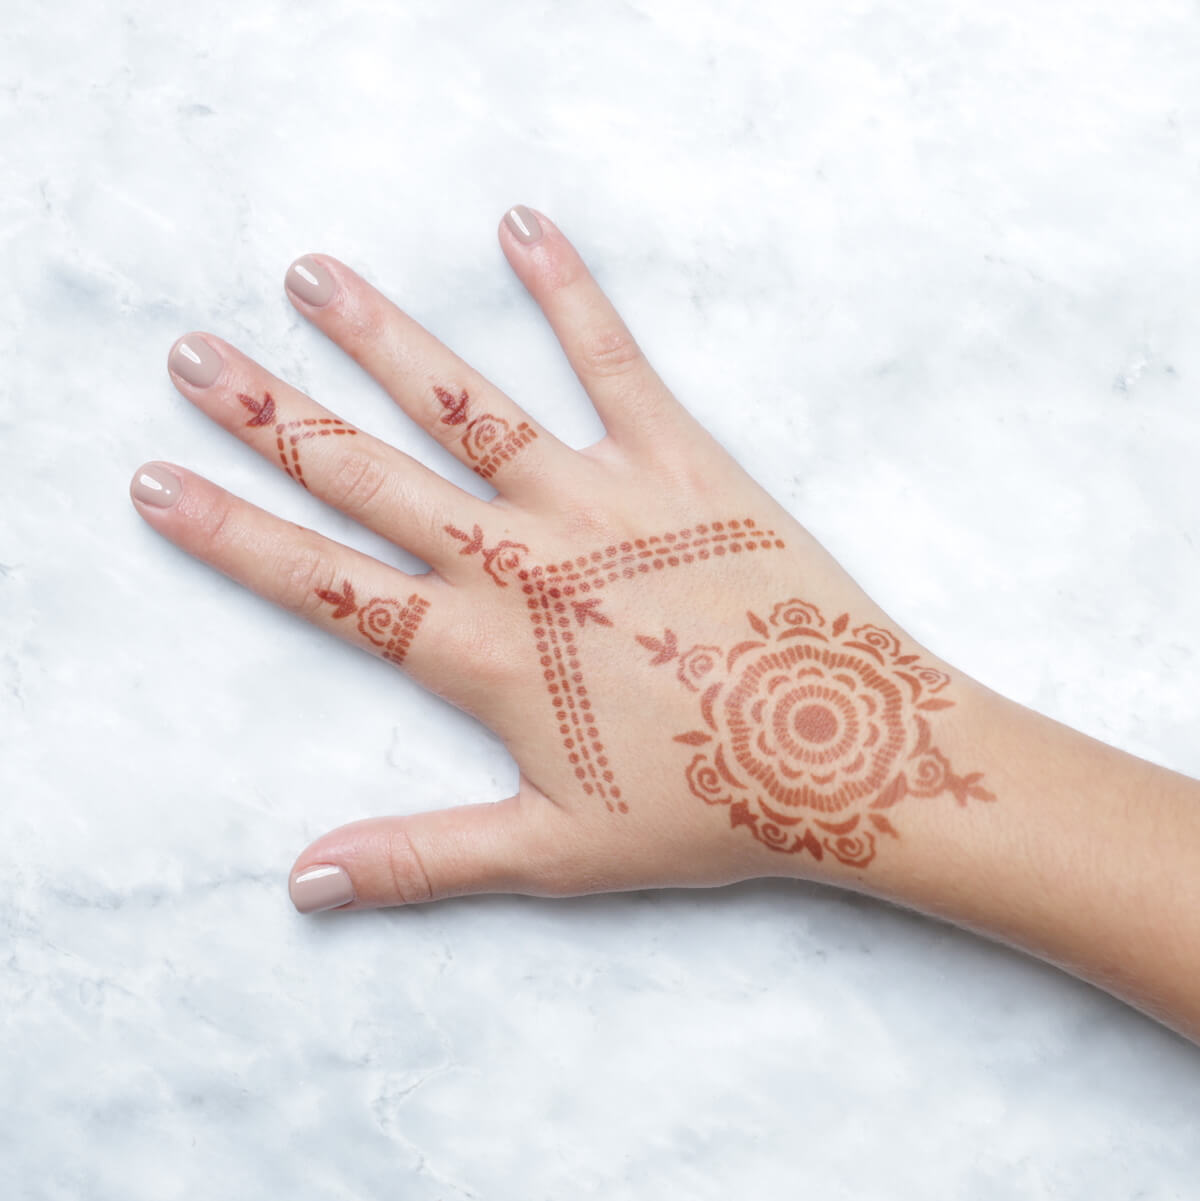 Camellia - rings and mandala henna designs on back of hand